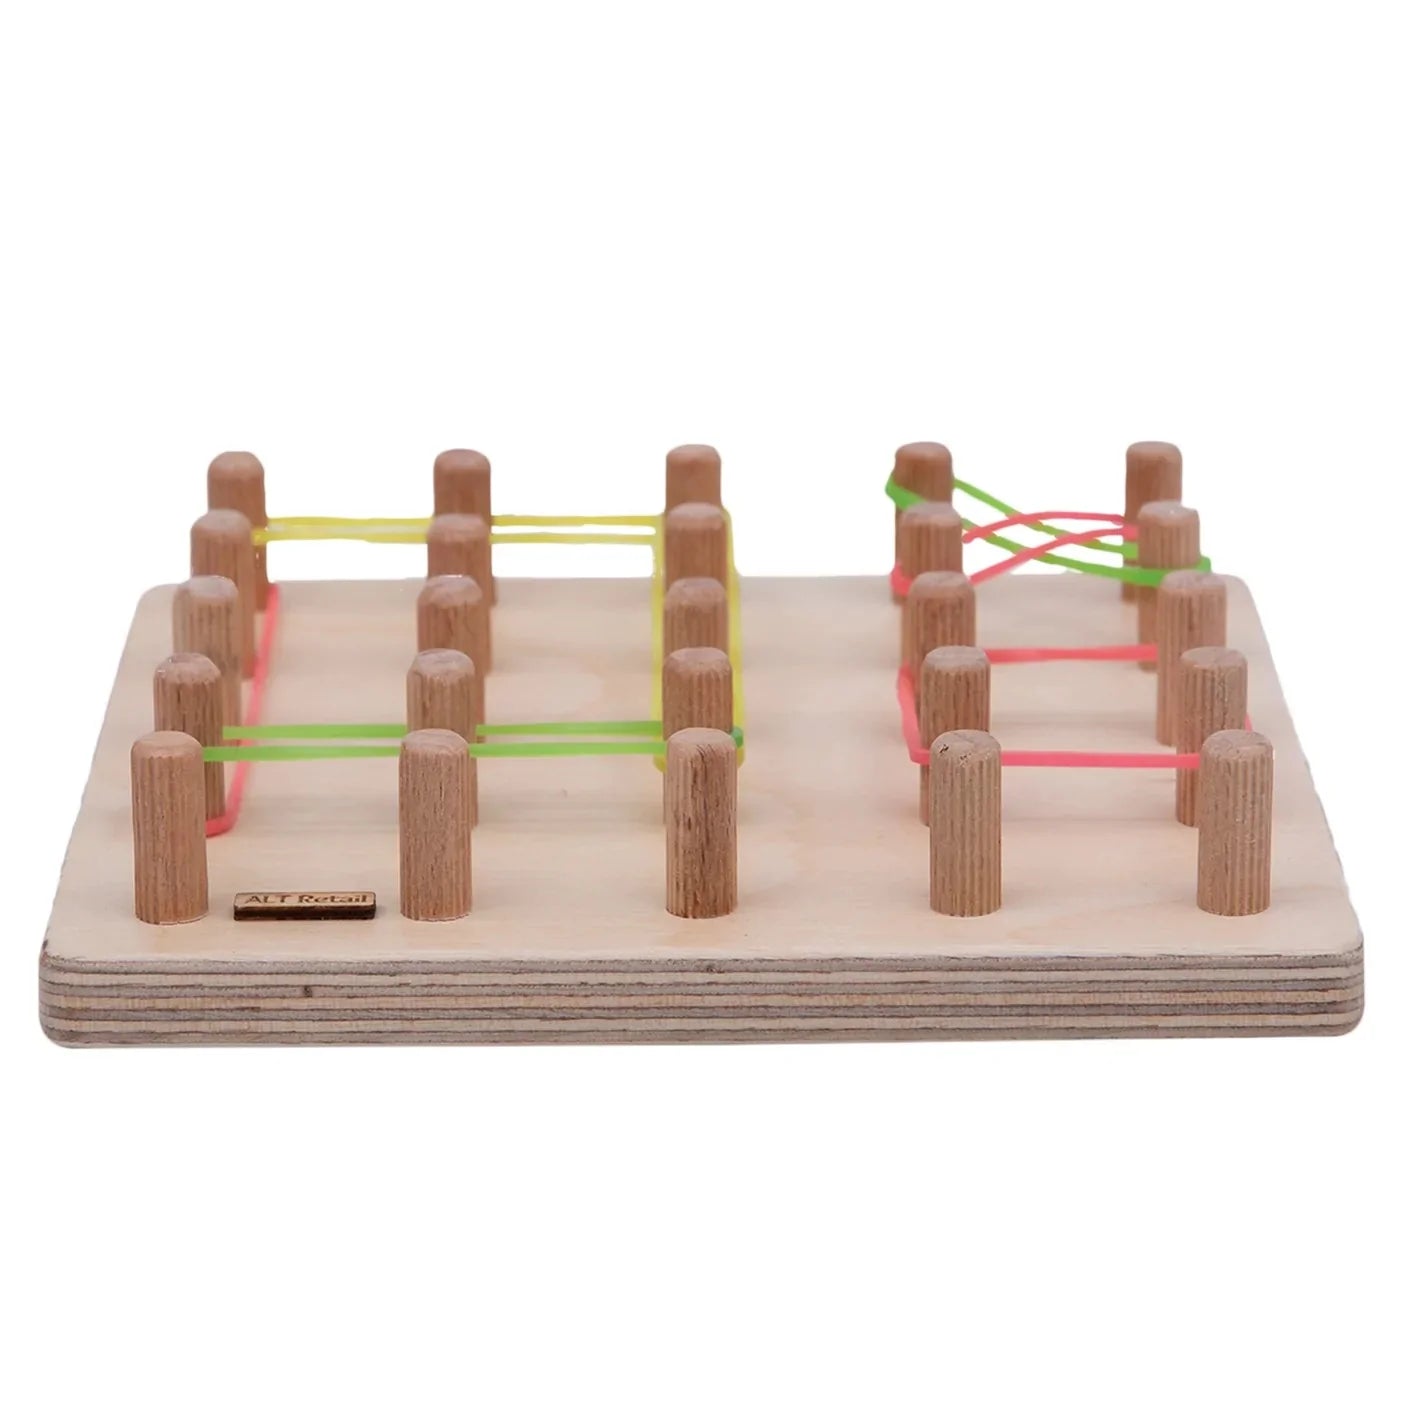 Buy Wooden Geoboard - Different Shapes - SkilloToys.com